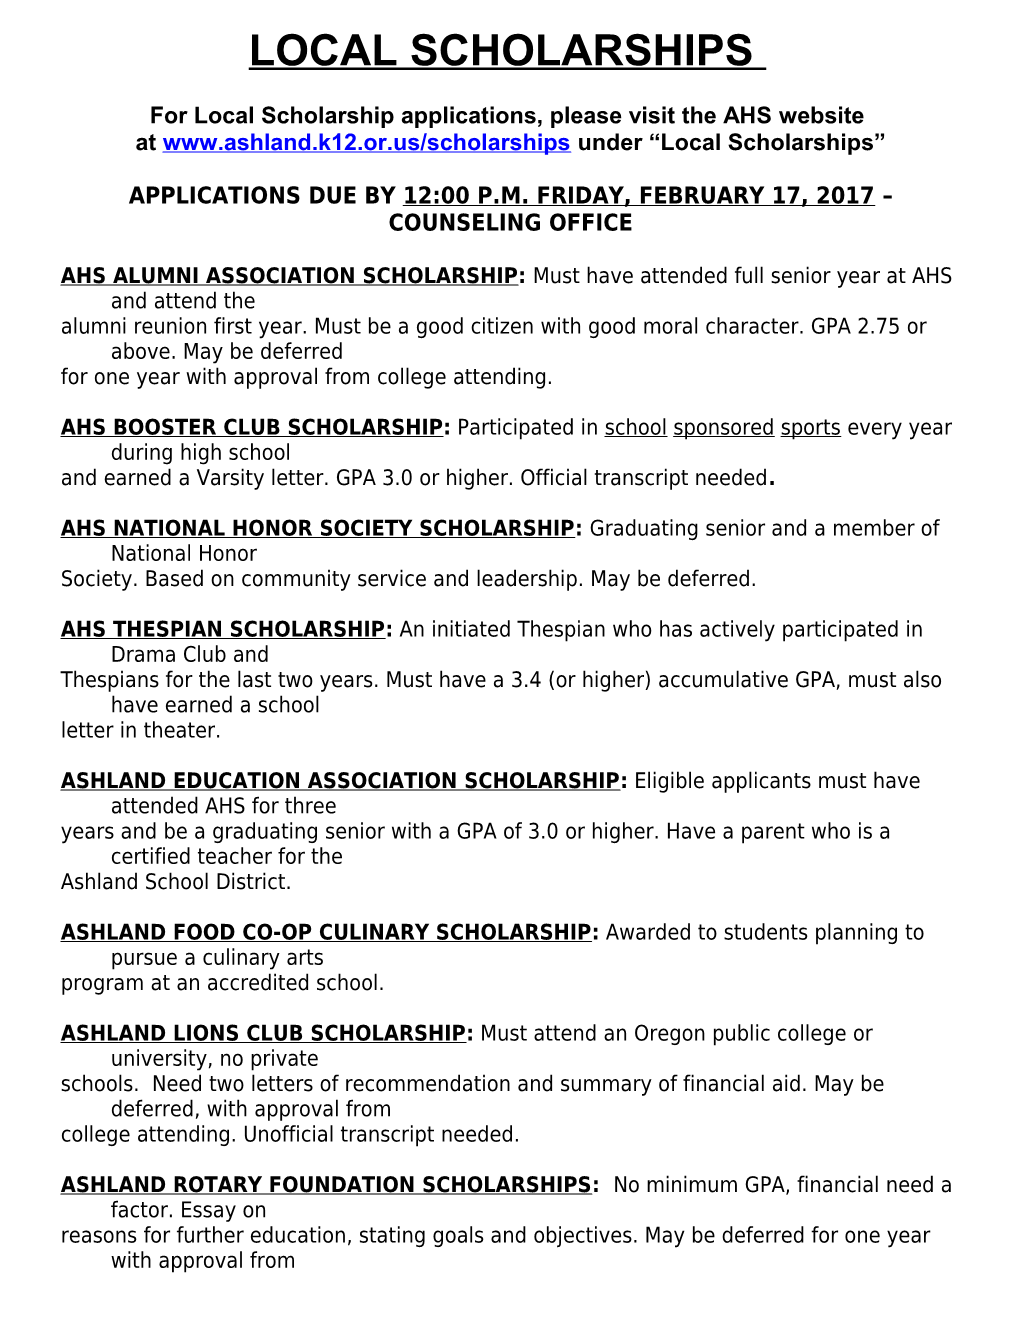 For Local Scholarship Applications, Please Visit the AHS Website